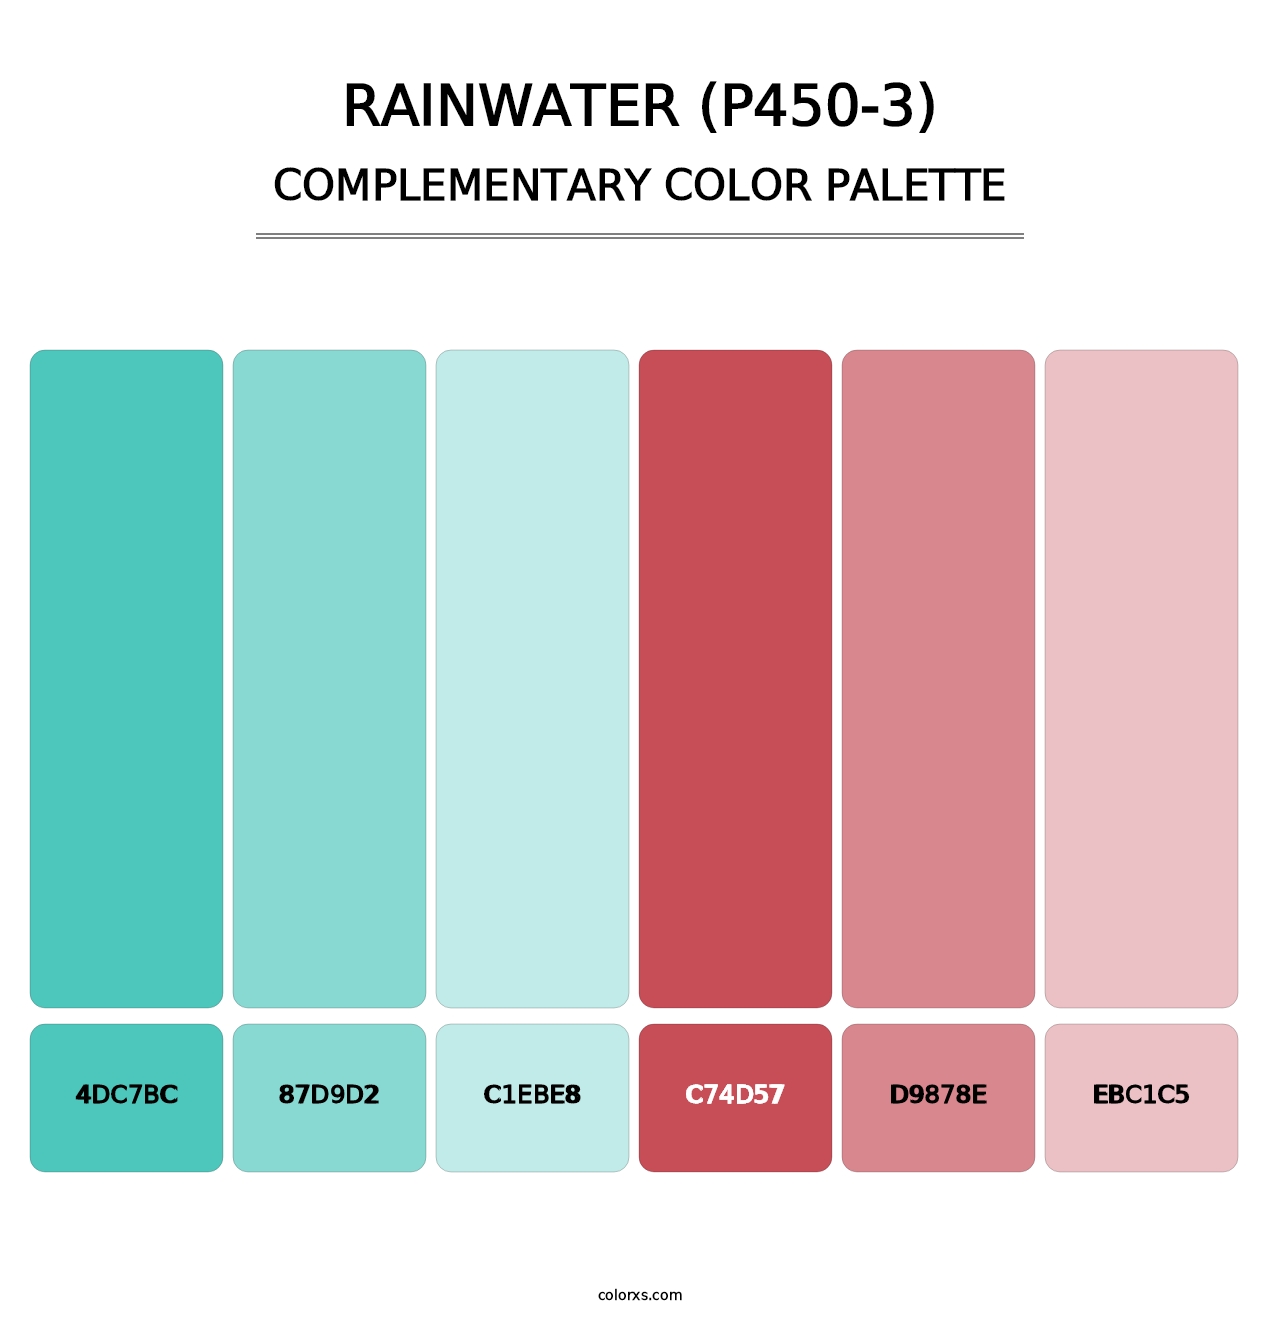 Rainwater (P450-3) - Complementary Color Palette